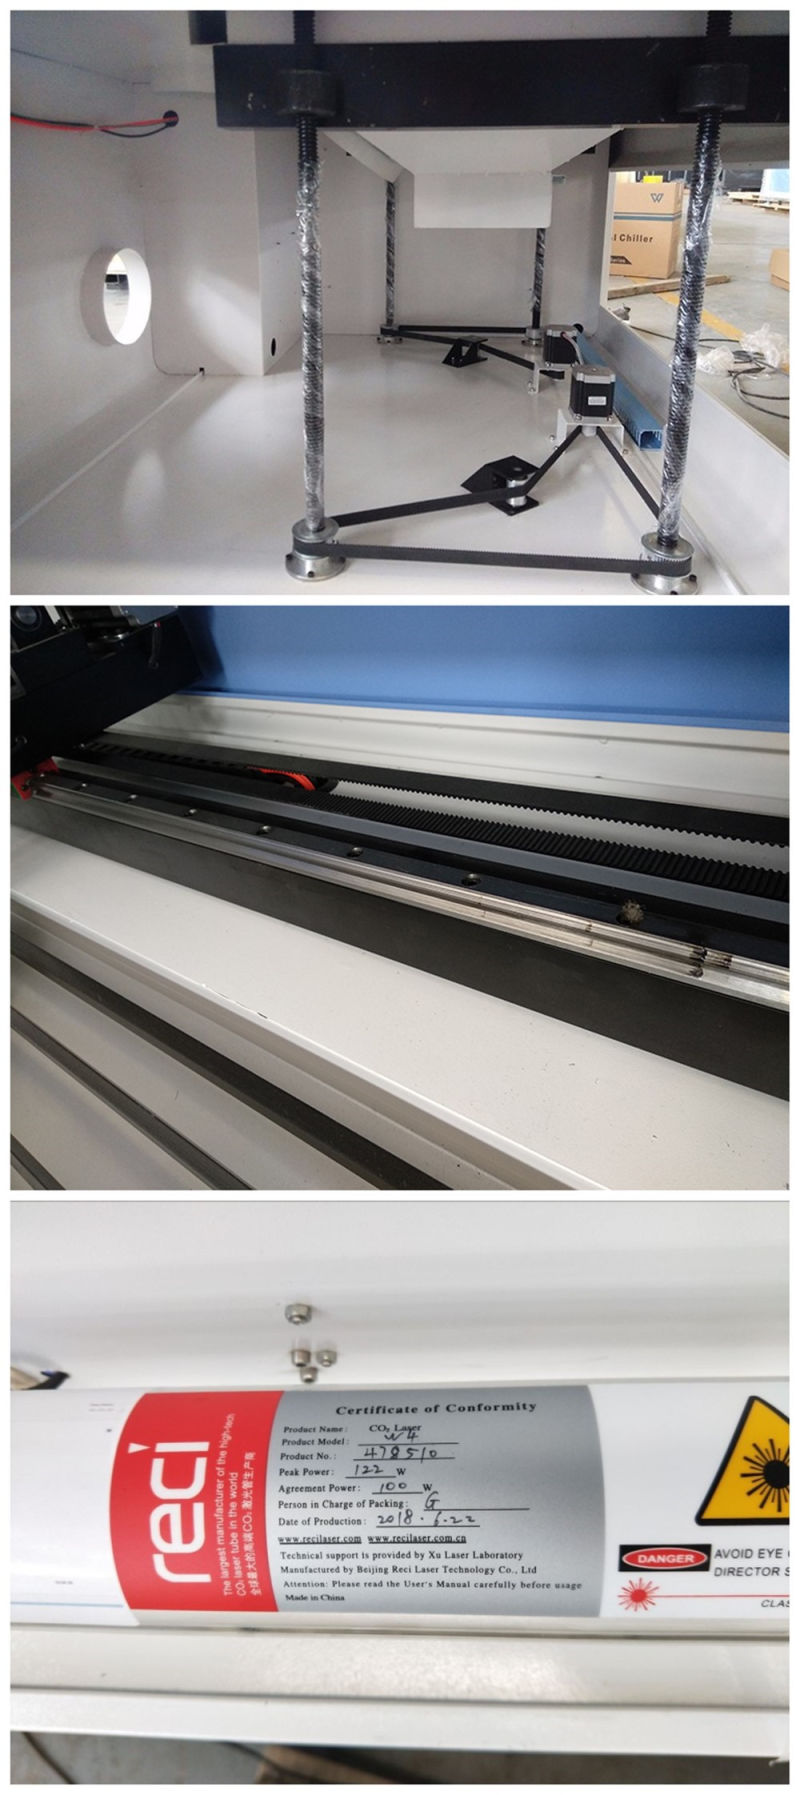 Glass Cutting Machine Large Size CO2 Laser Engraving Cutter Machine for Fabric Leather Laser Engraver